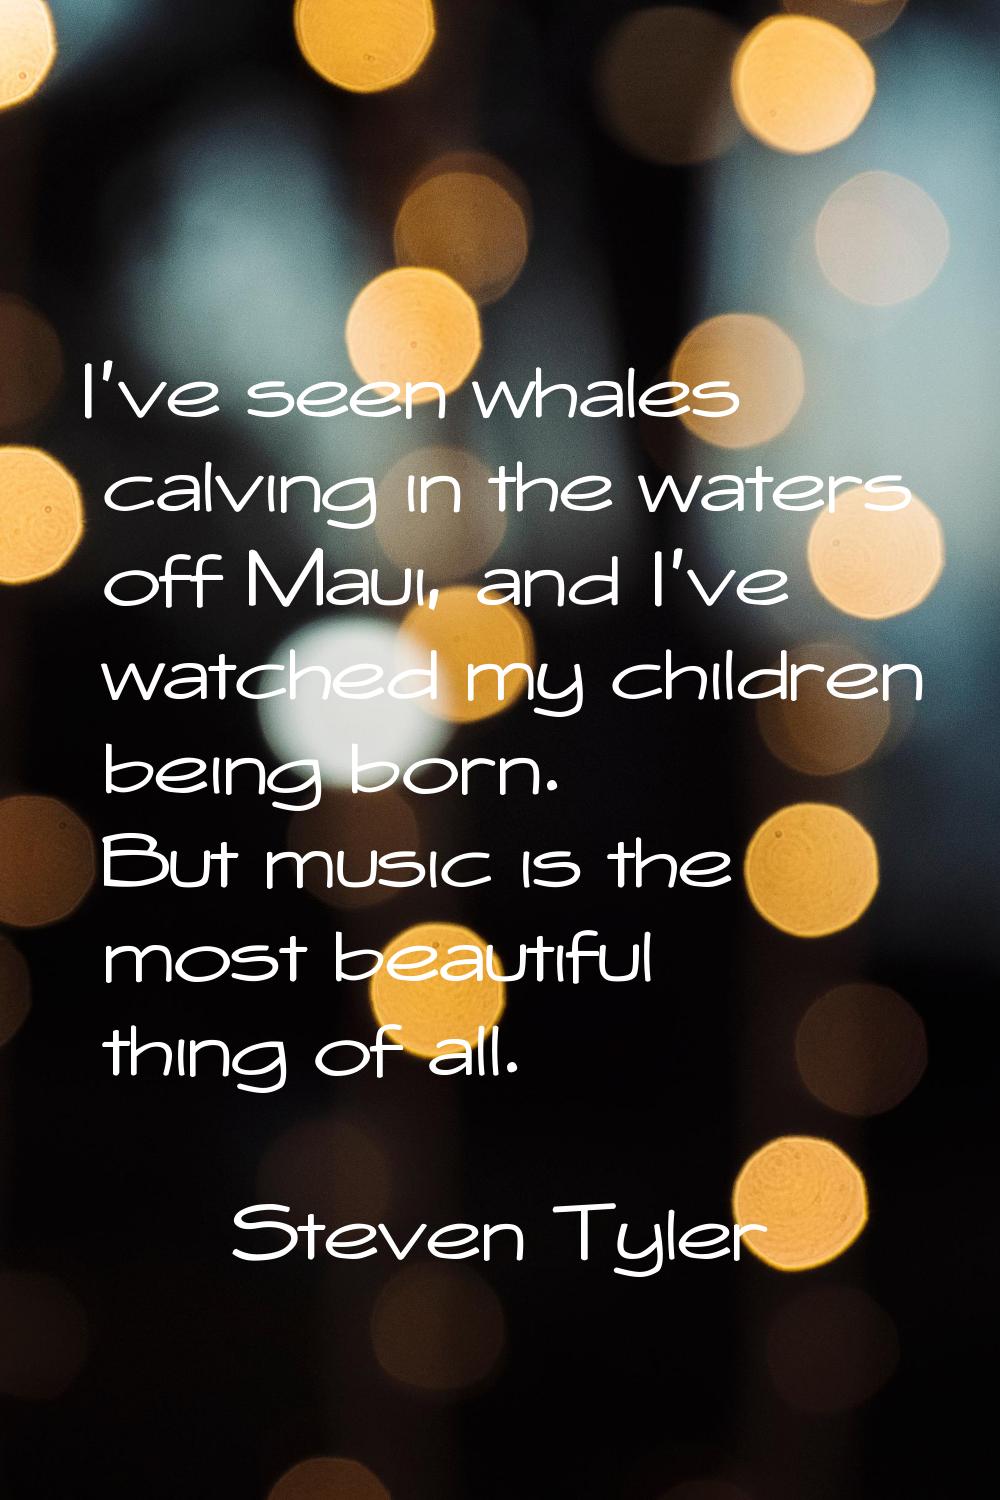 I've seen whales calving in the waters off Maui, and I've watched my children being born. But music